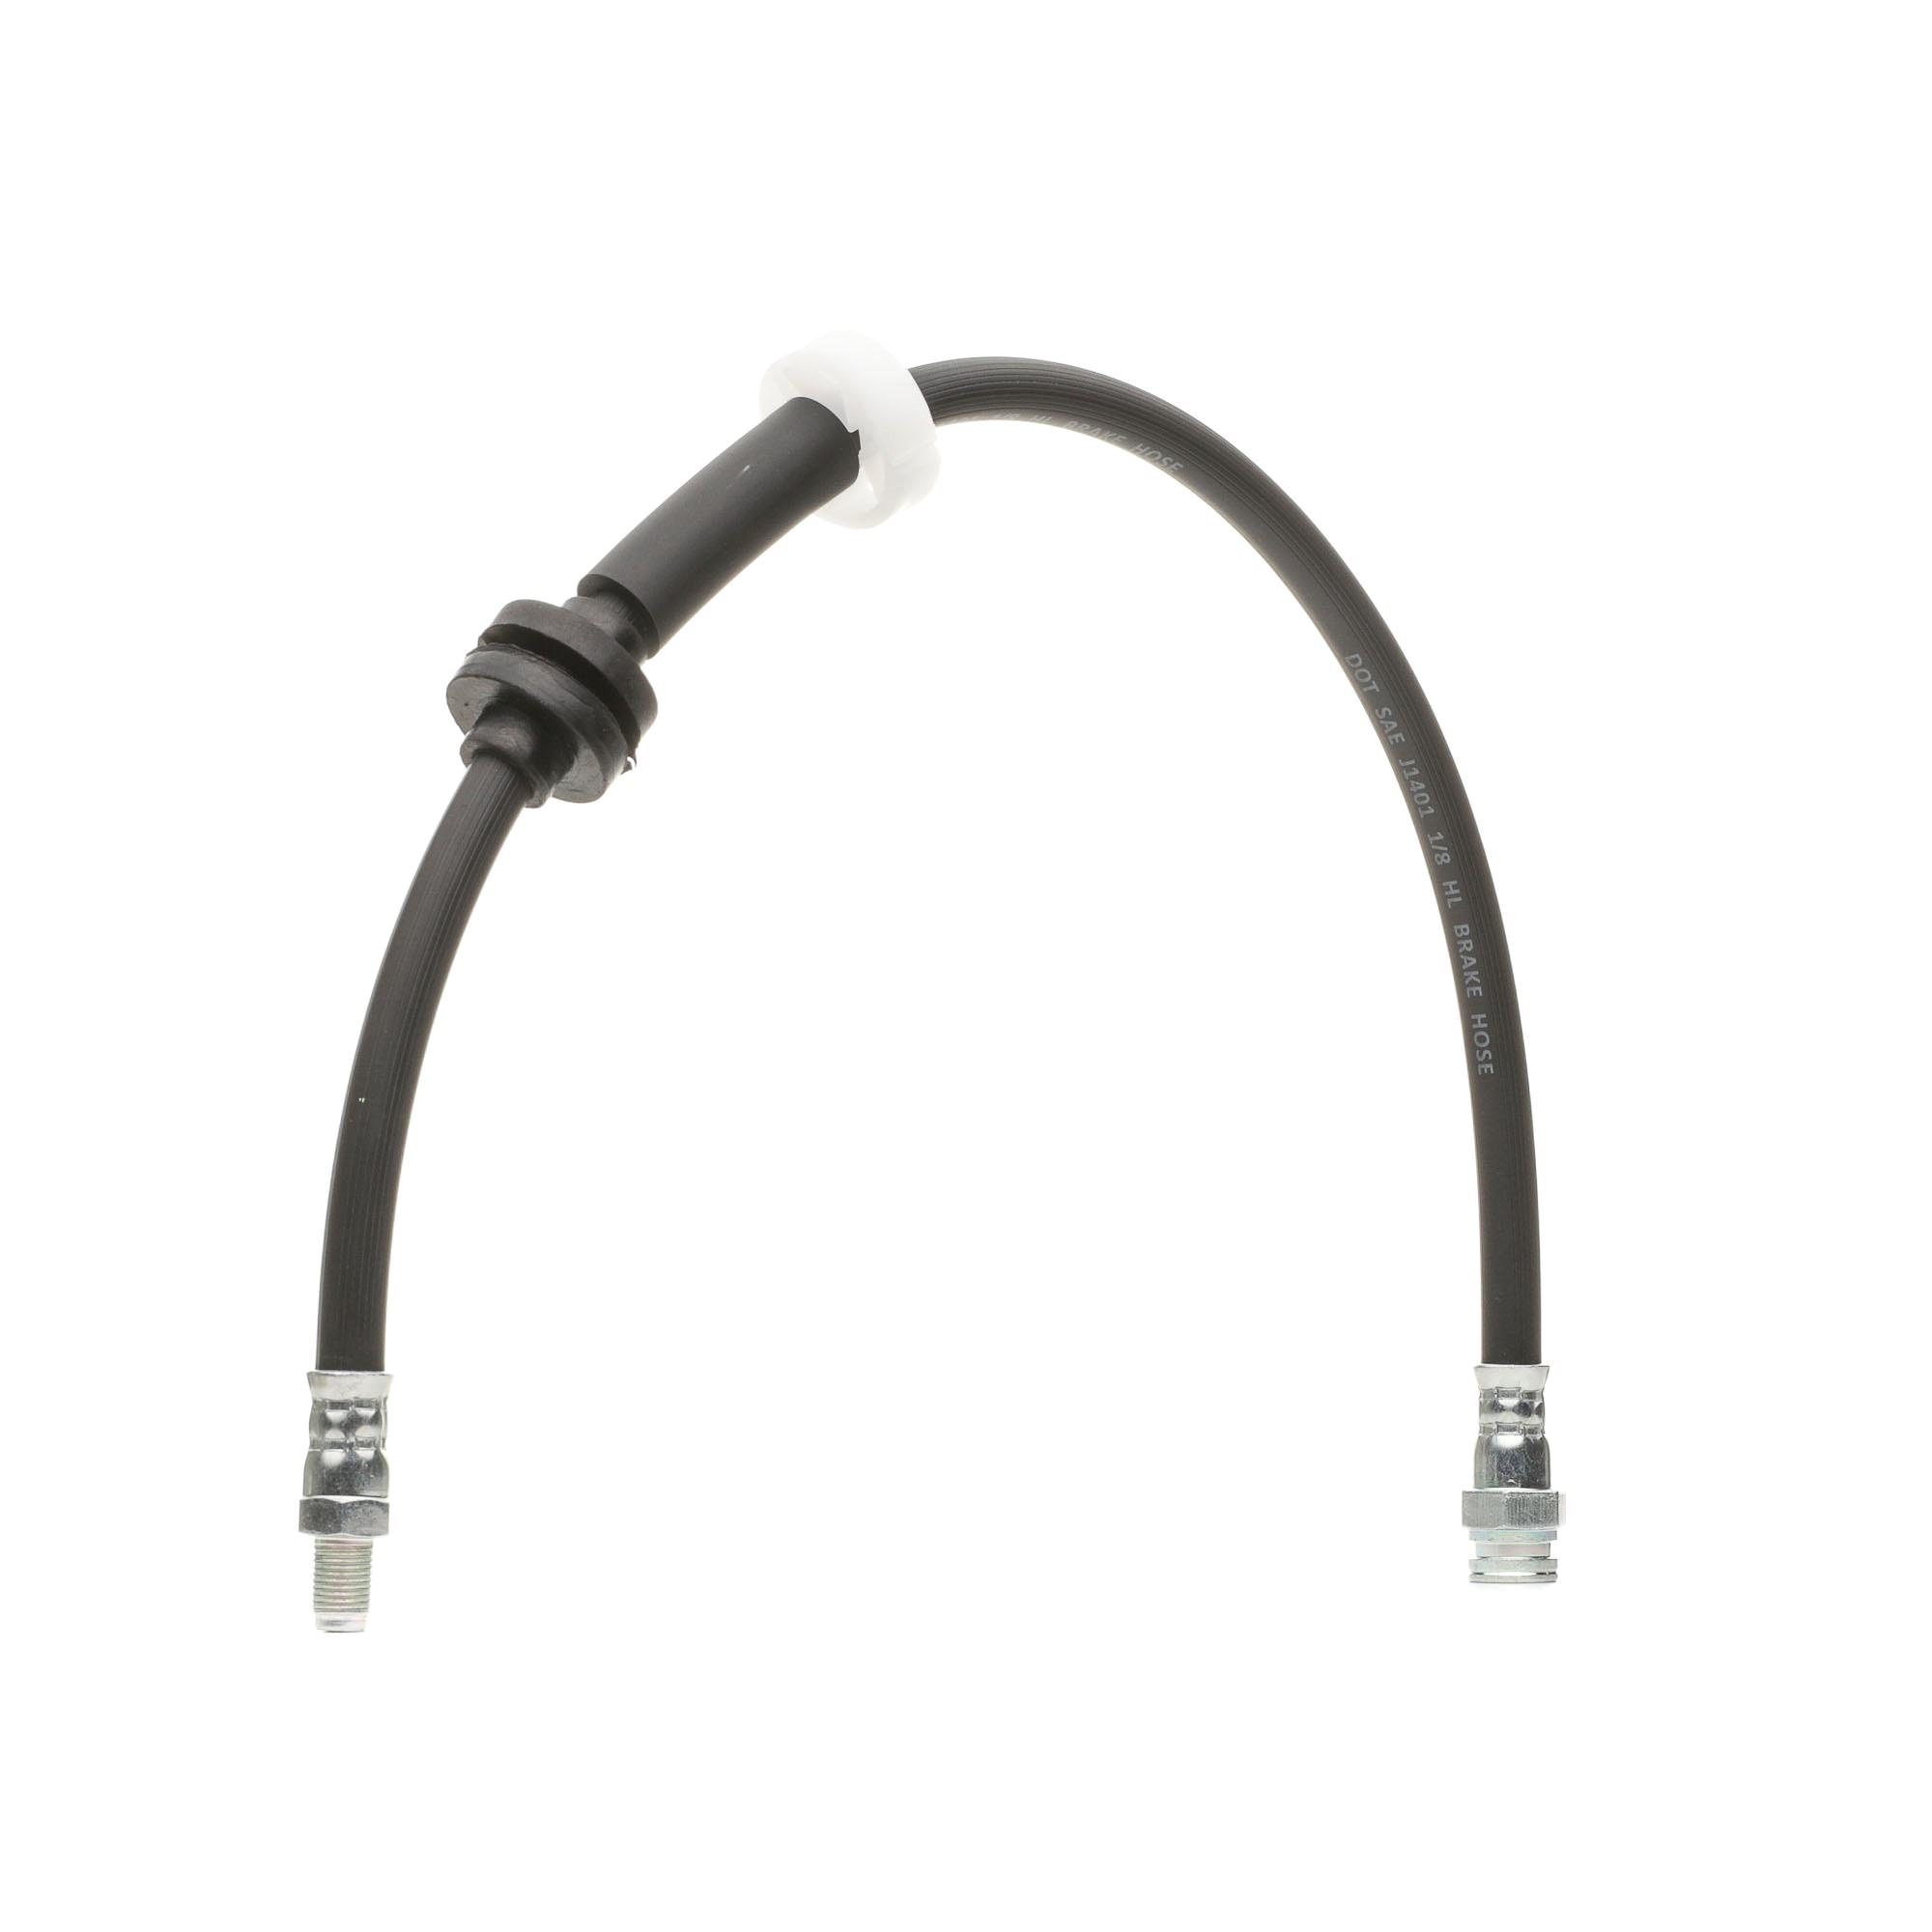 Buy Brake hose RIDEX 83B1215 - Pipes and hoses parts Fiat Ducato 244 Van online